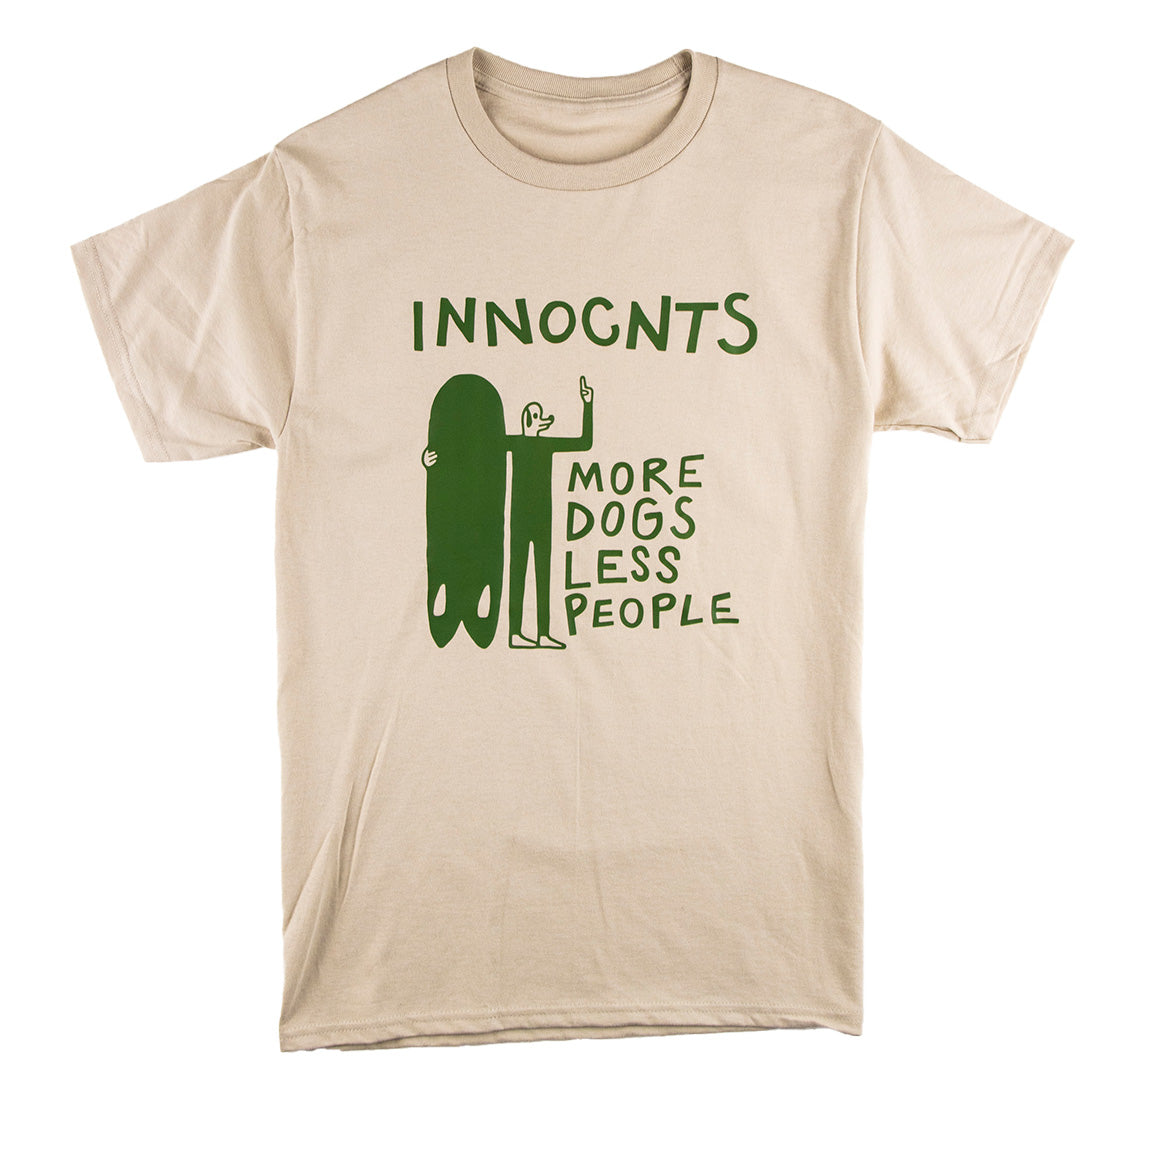 INNOCNTS MORE DOGS TEE